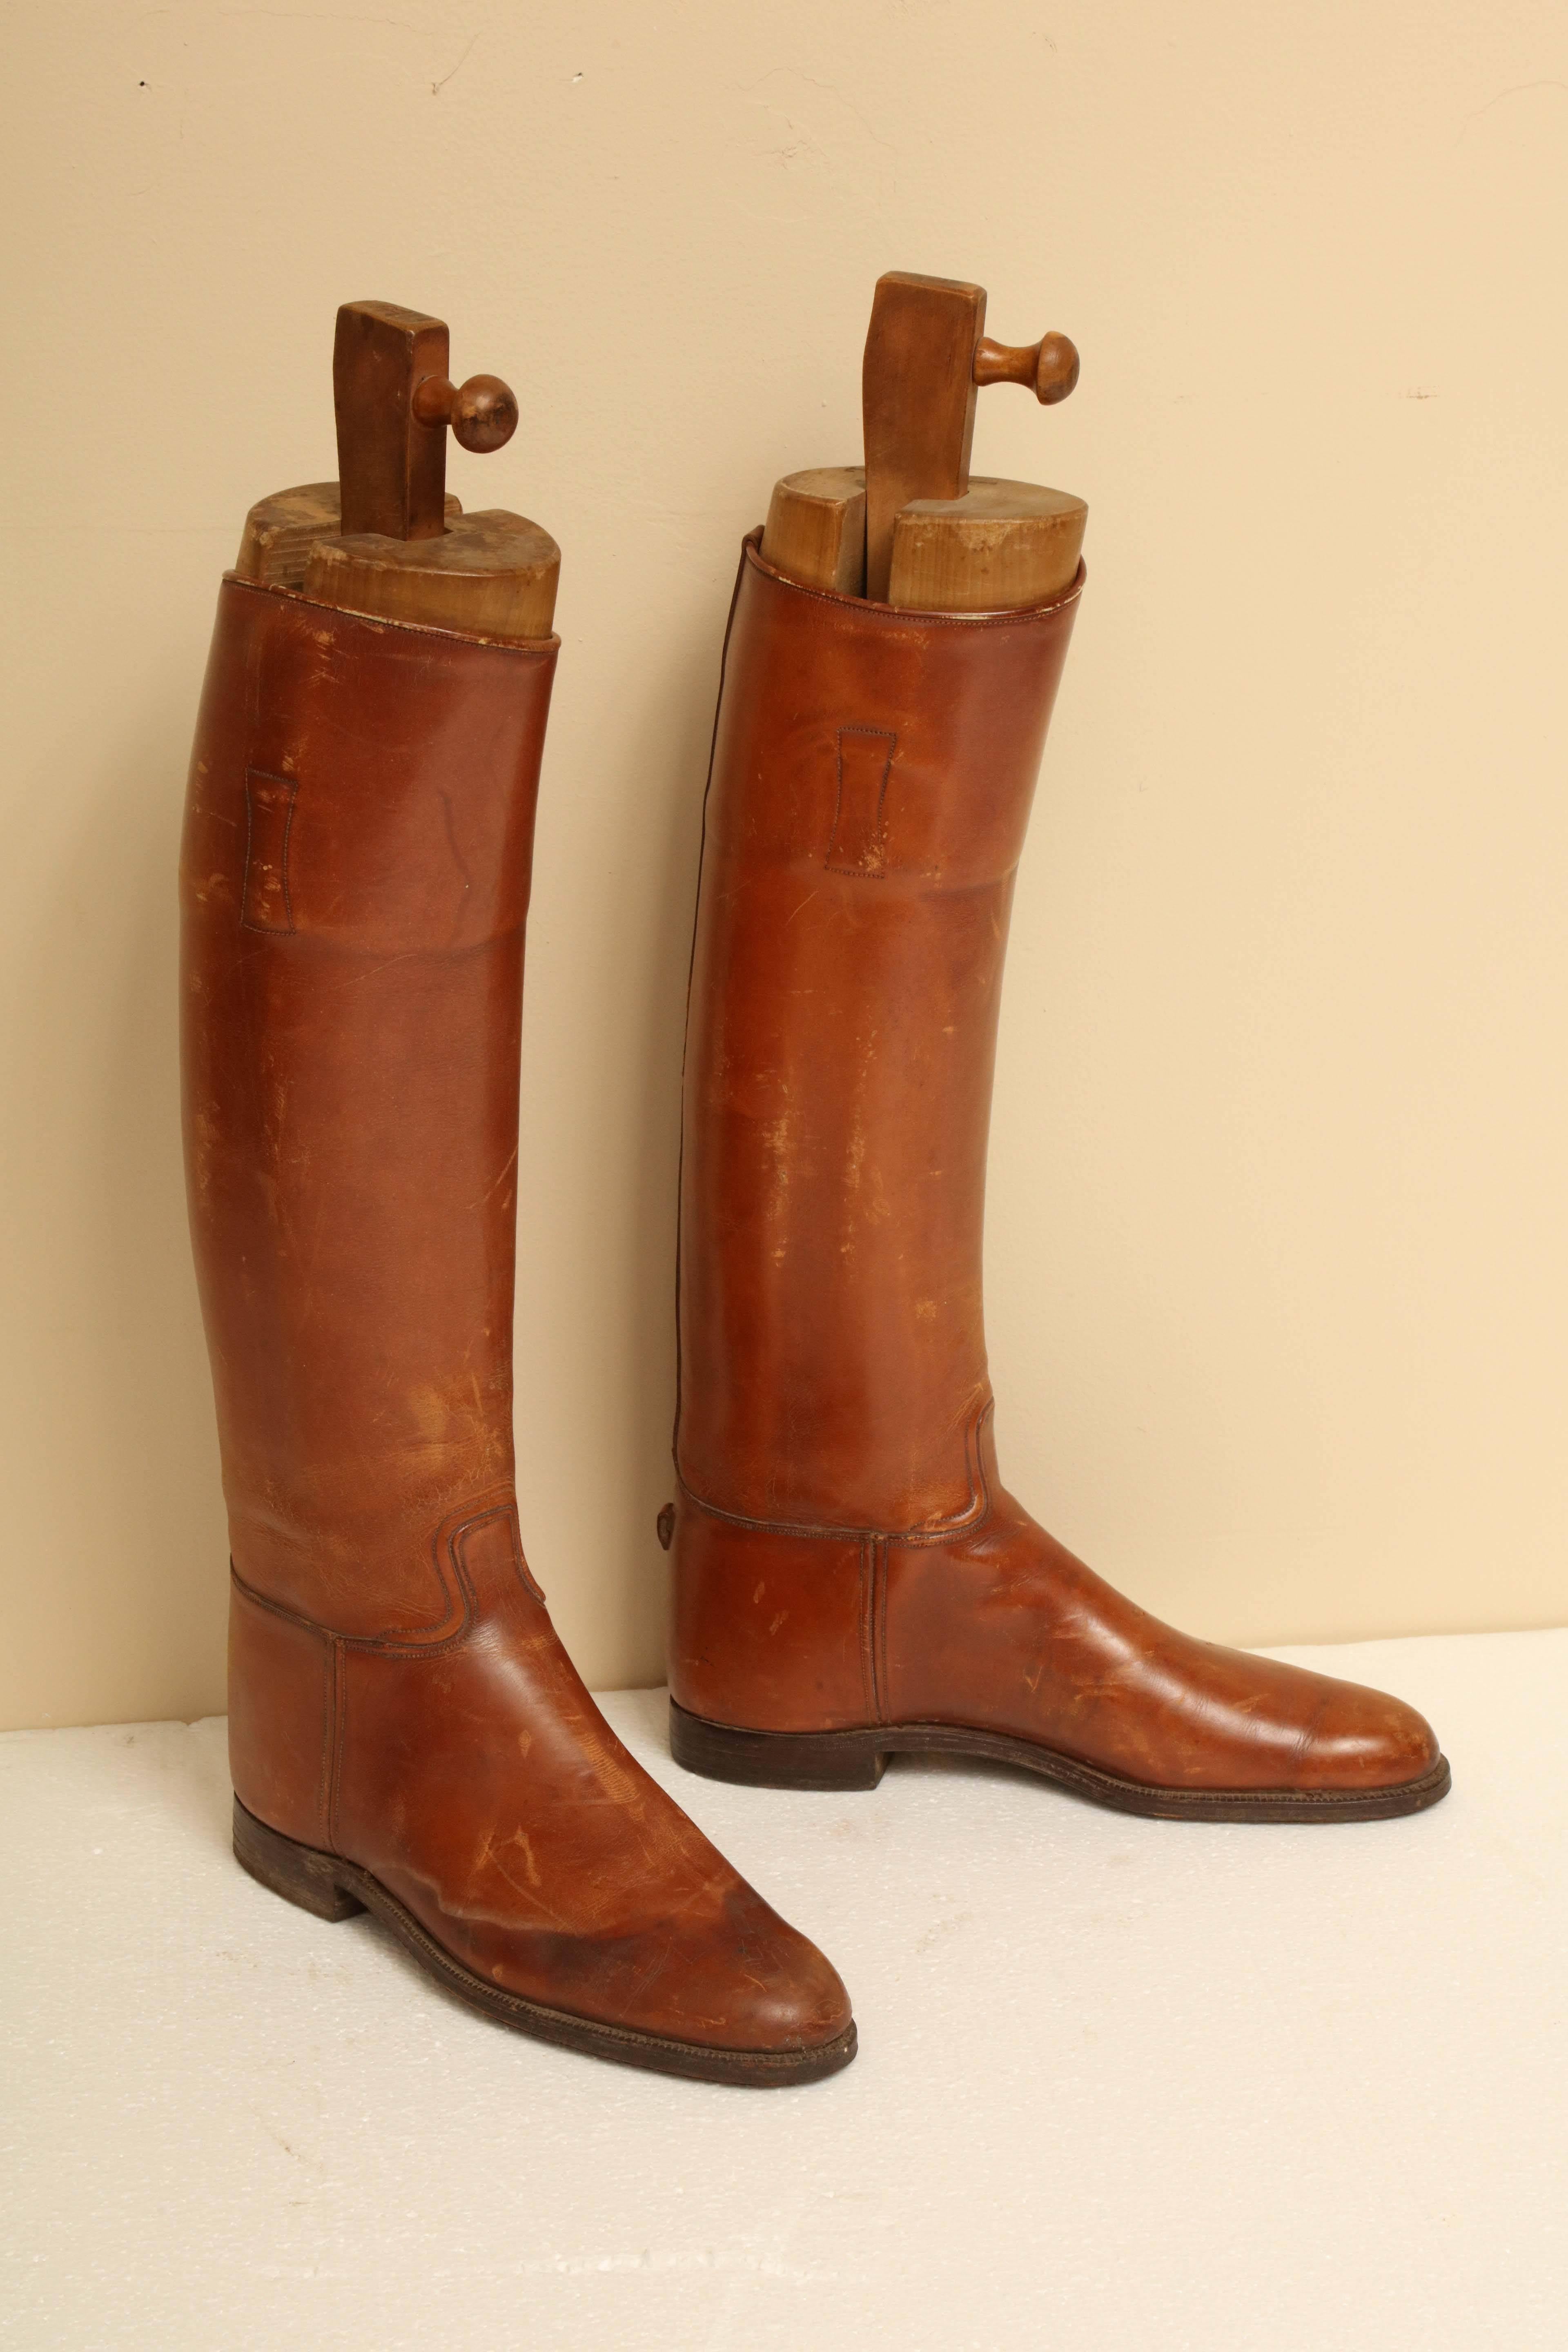 Pair of English riding boots with custom wooden boot trees.
Inside measurement of 27 centimeters long. Size:
9.5 U.K.
10 U.S.
Narrow.